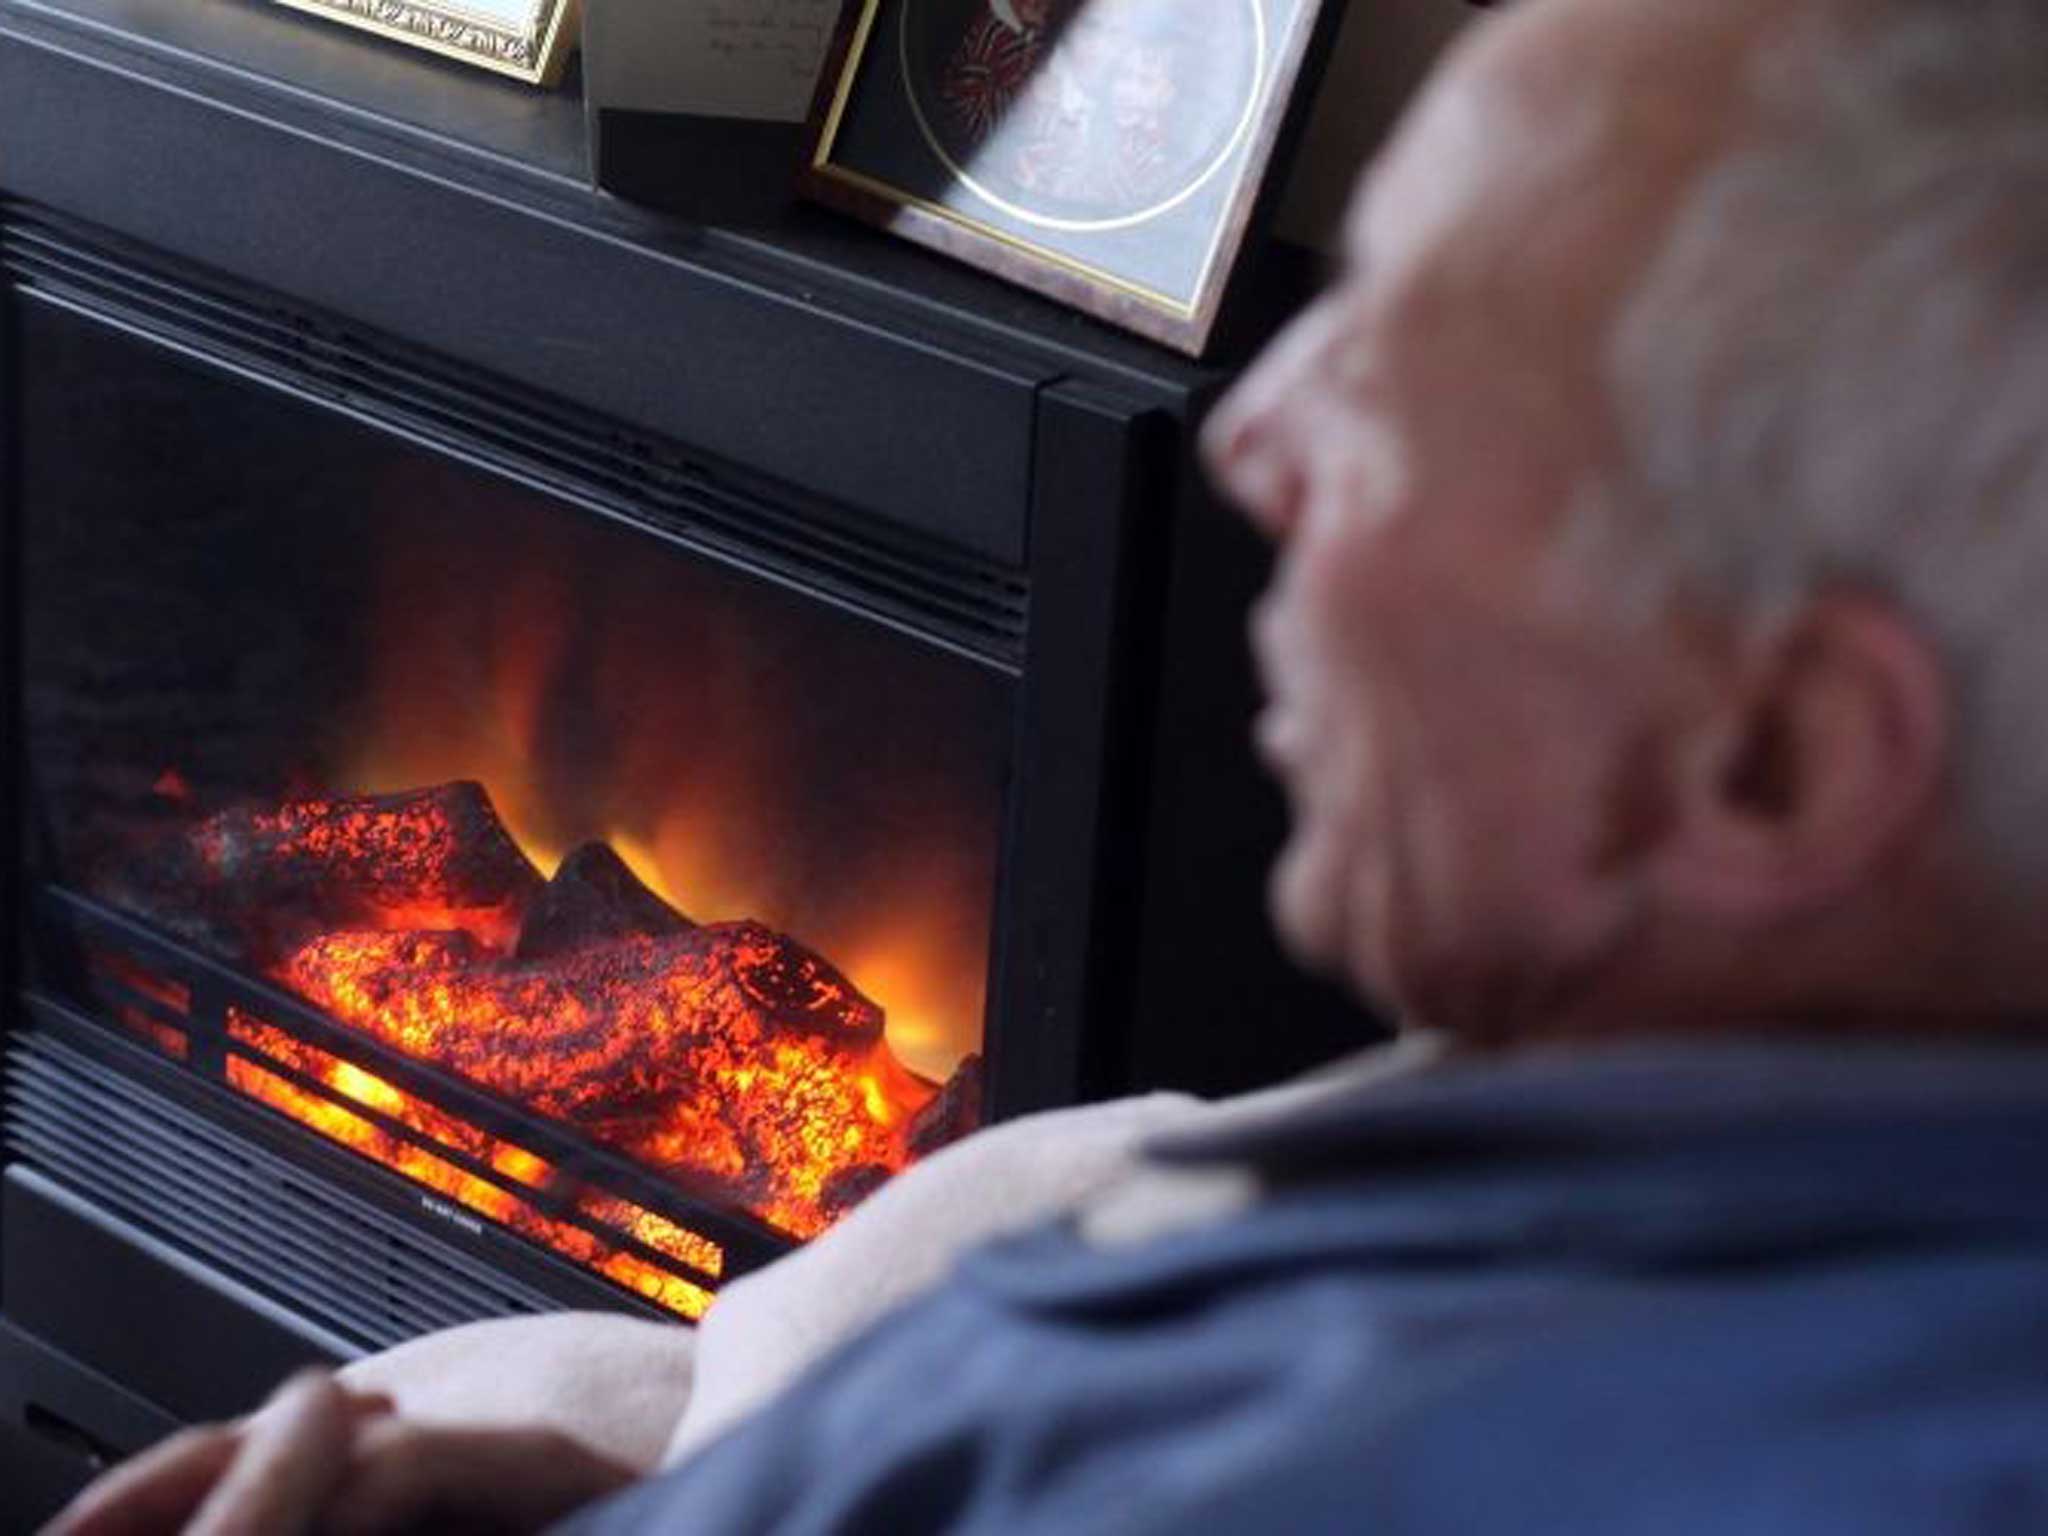 Some 14.3 million households turned off heating at some point this winter to cut energy bills